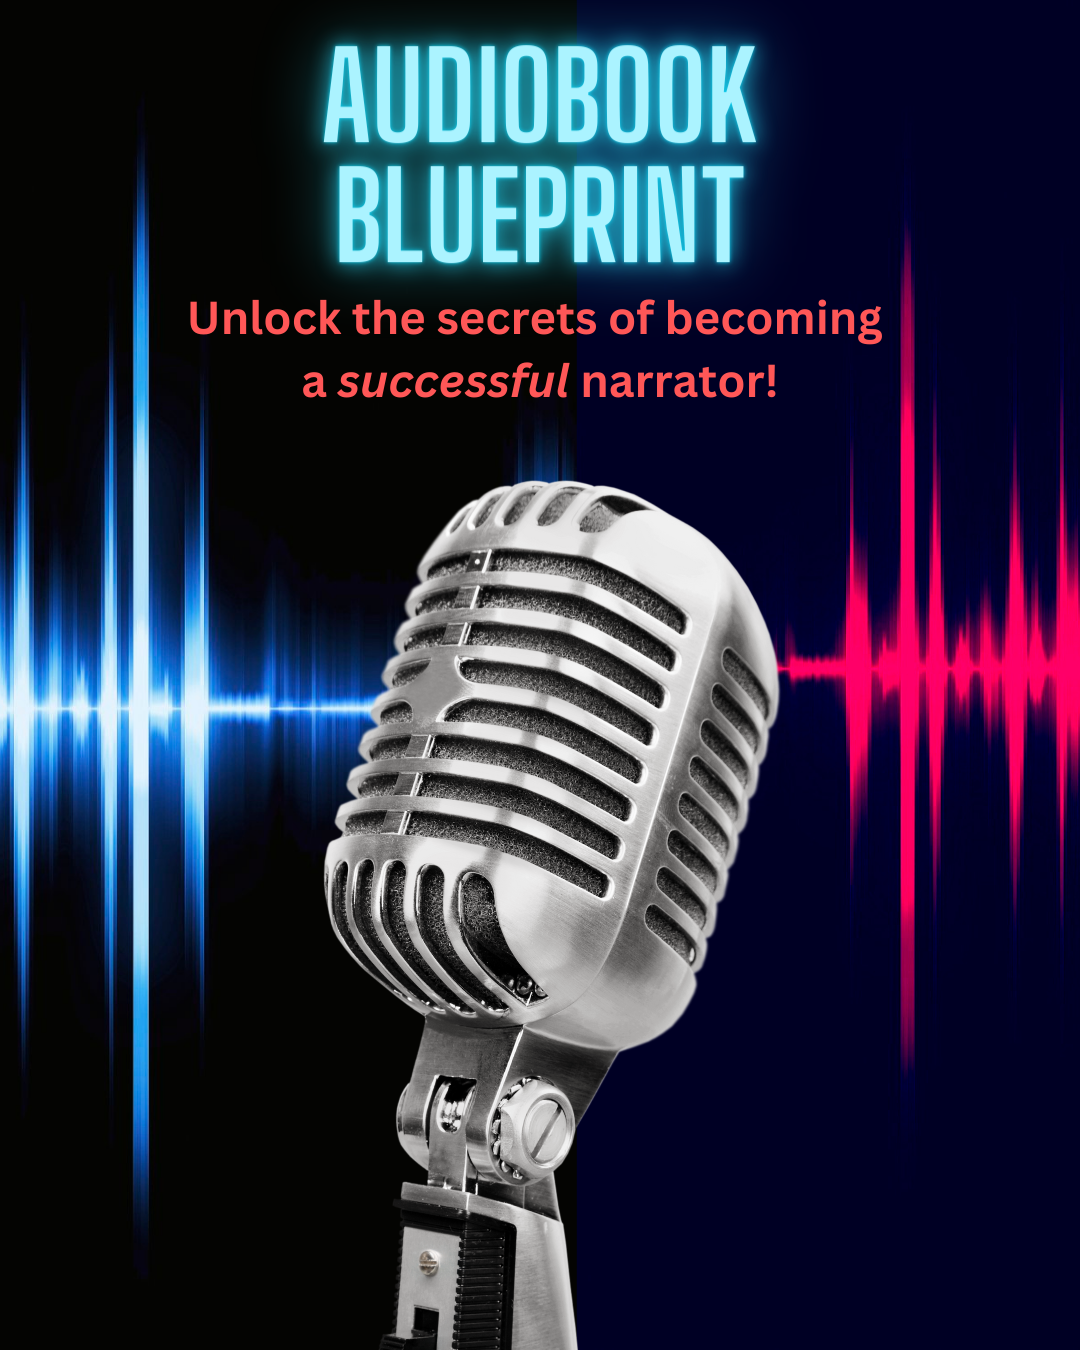 The Audiobook Blueprint narration course is the roadmap to become a successful narrator and earn money reading books from home on platforms like Audible with no experience. Taught by Nikki Connected, who earned 5 contracts from her first audition.